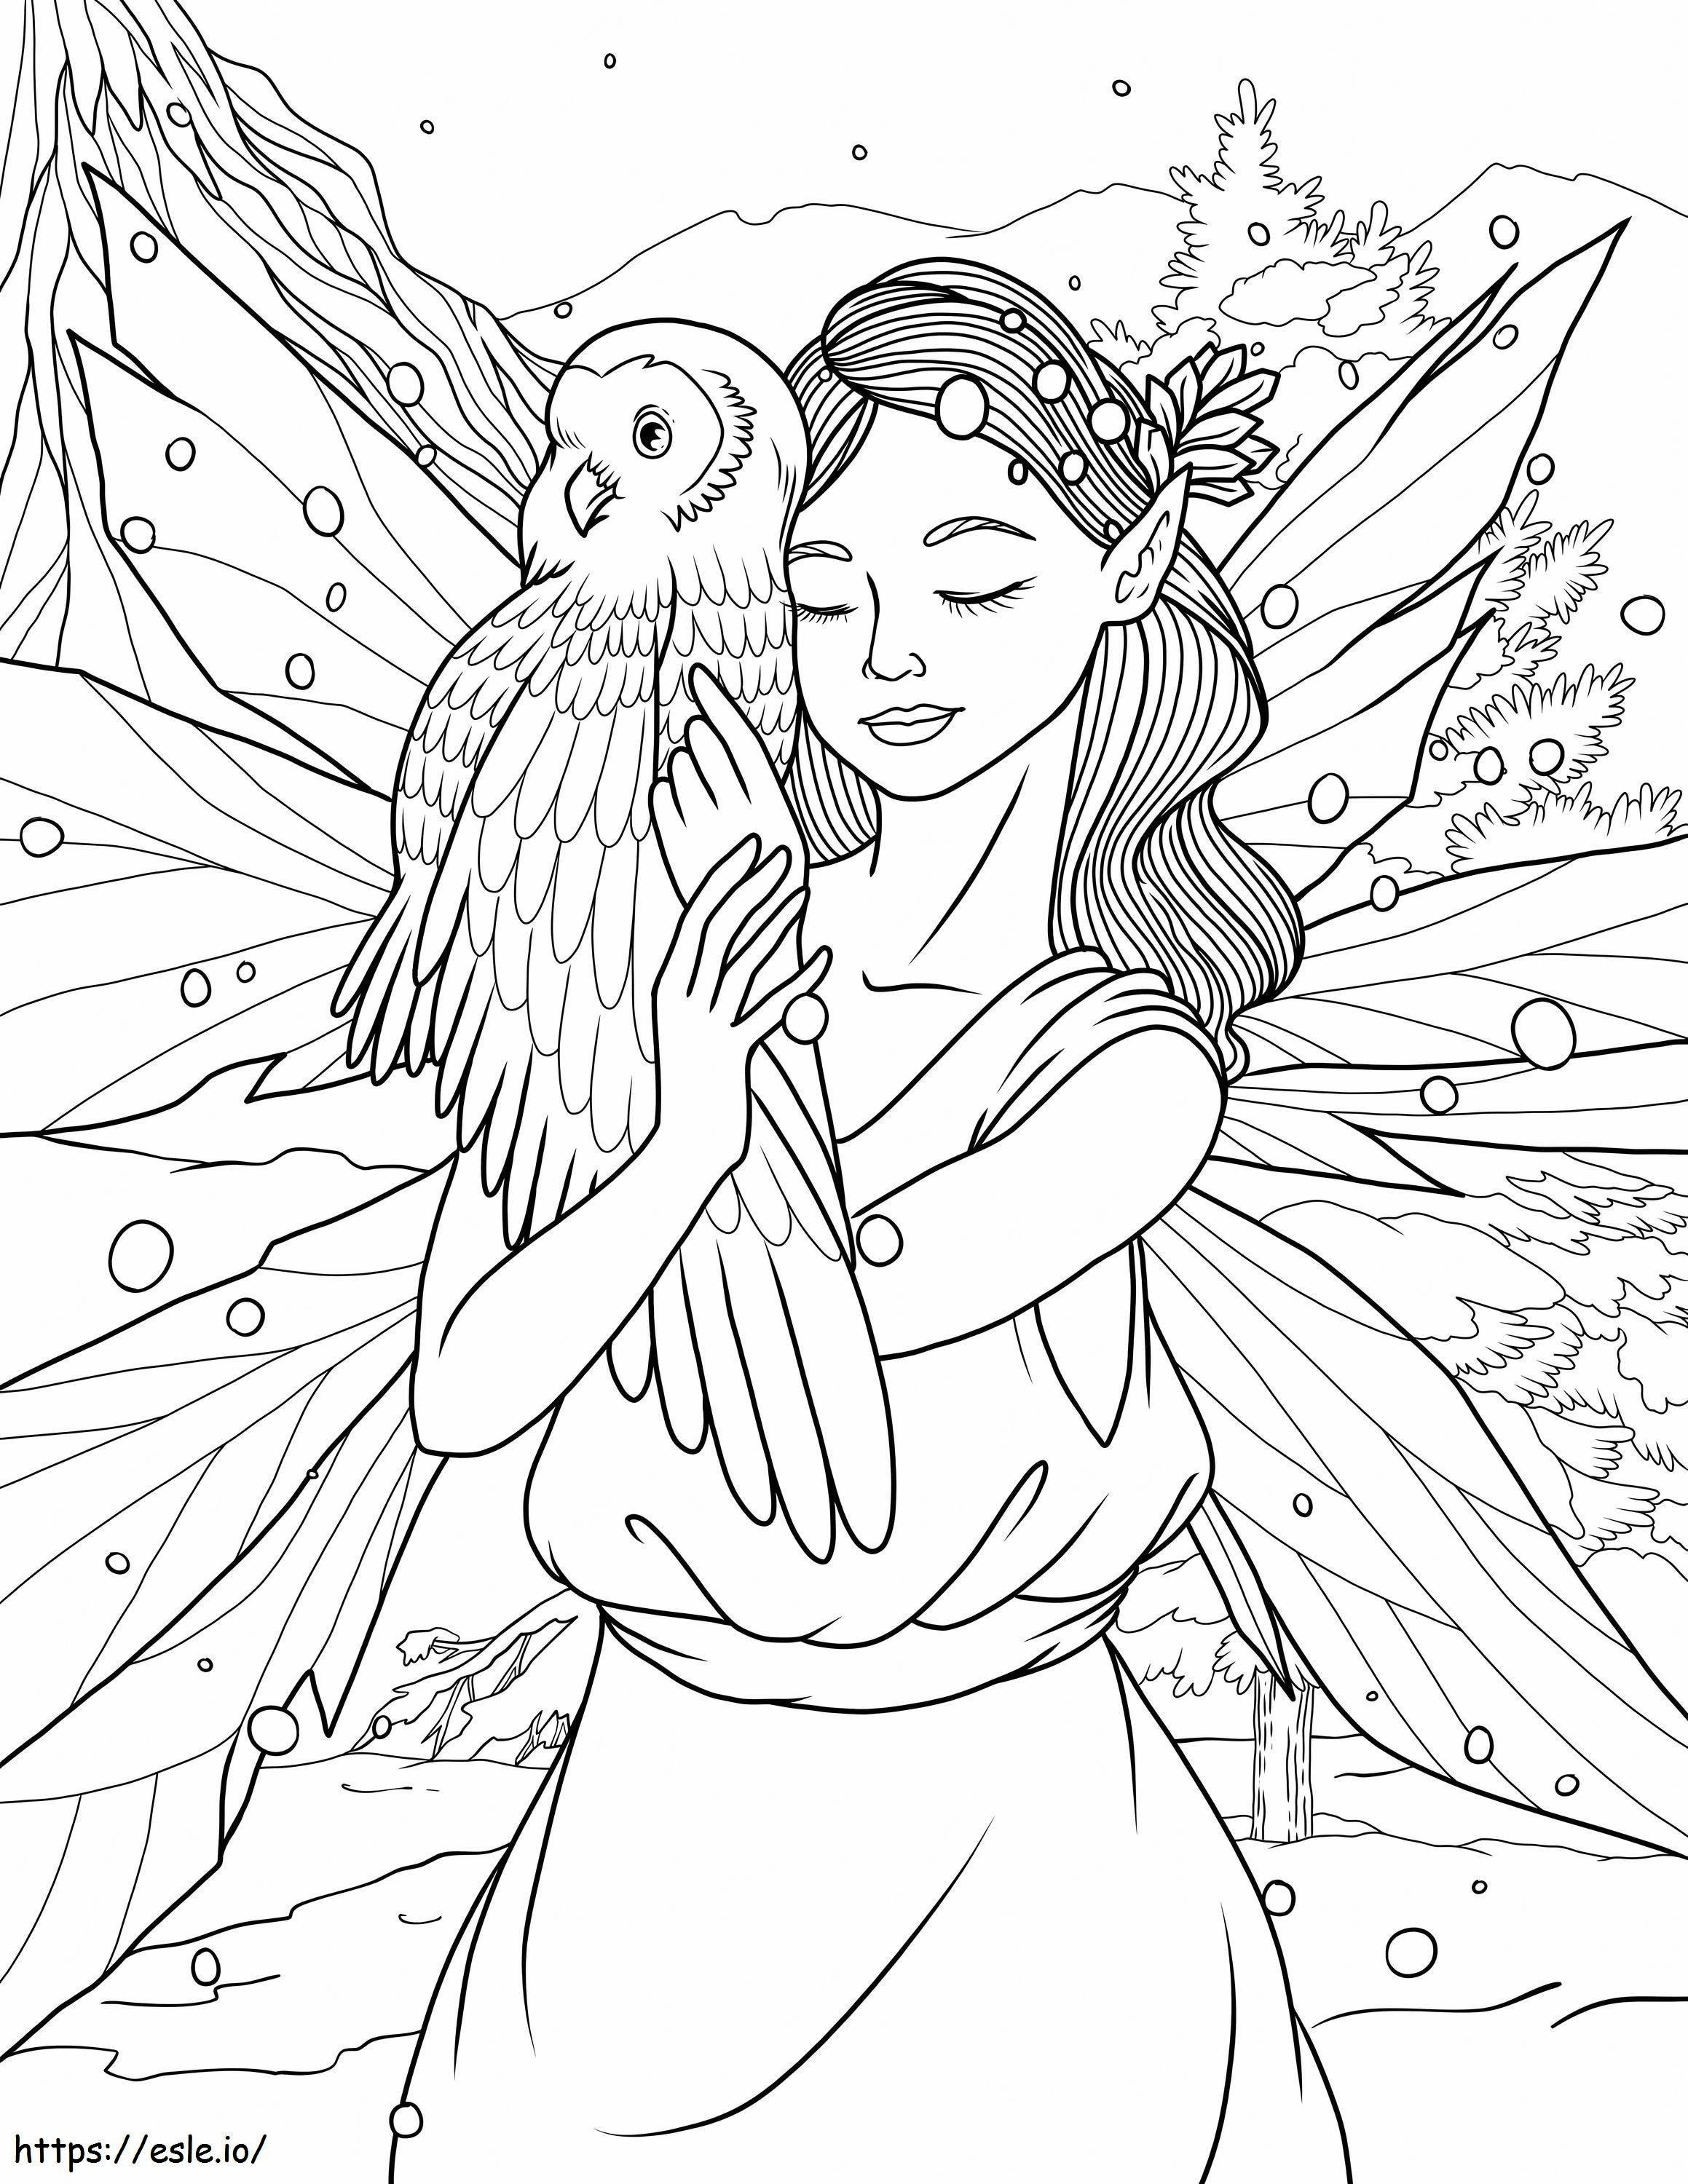 Fairy Hugging Eagle coloring page